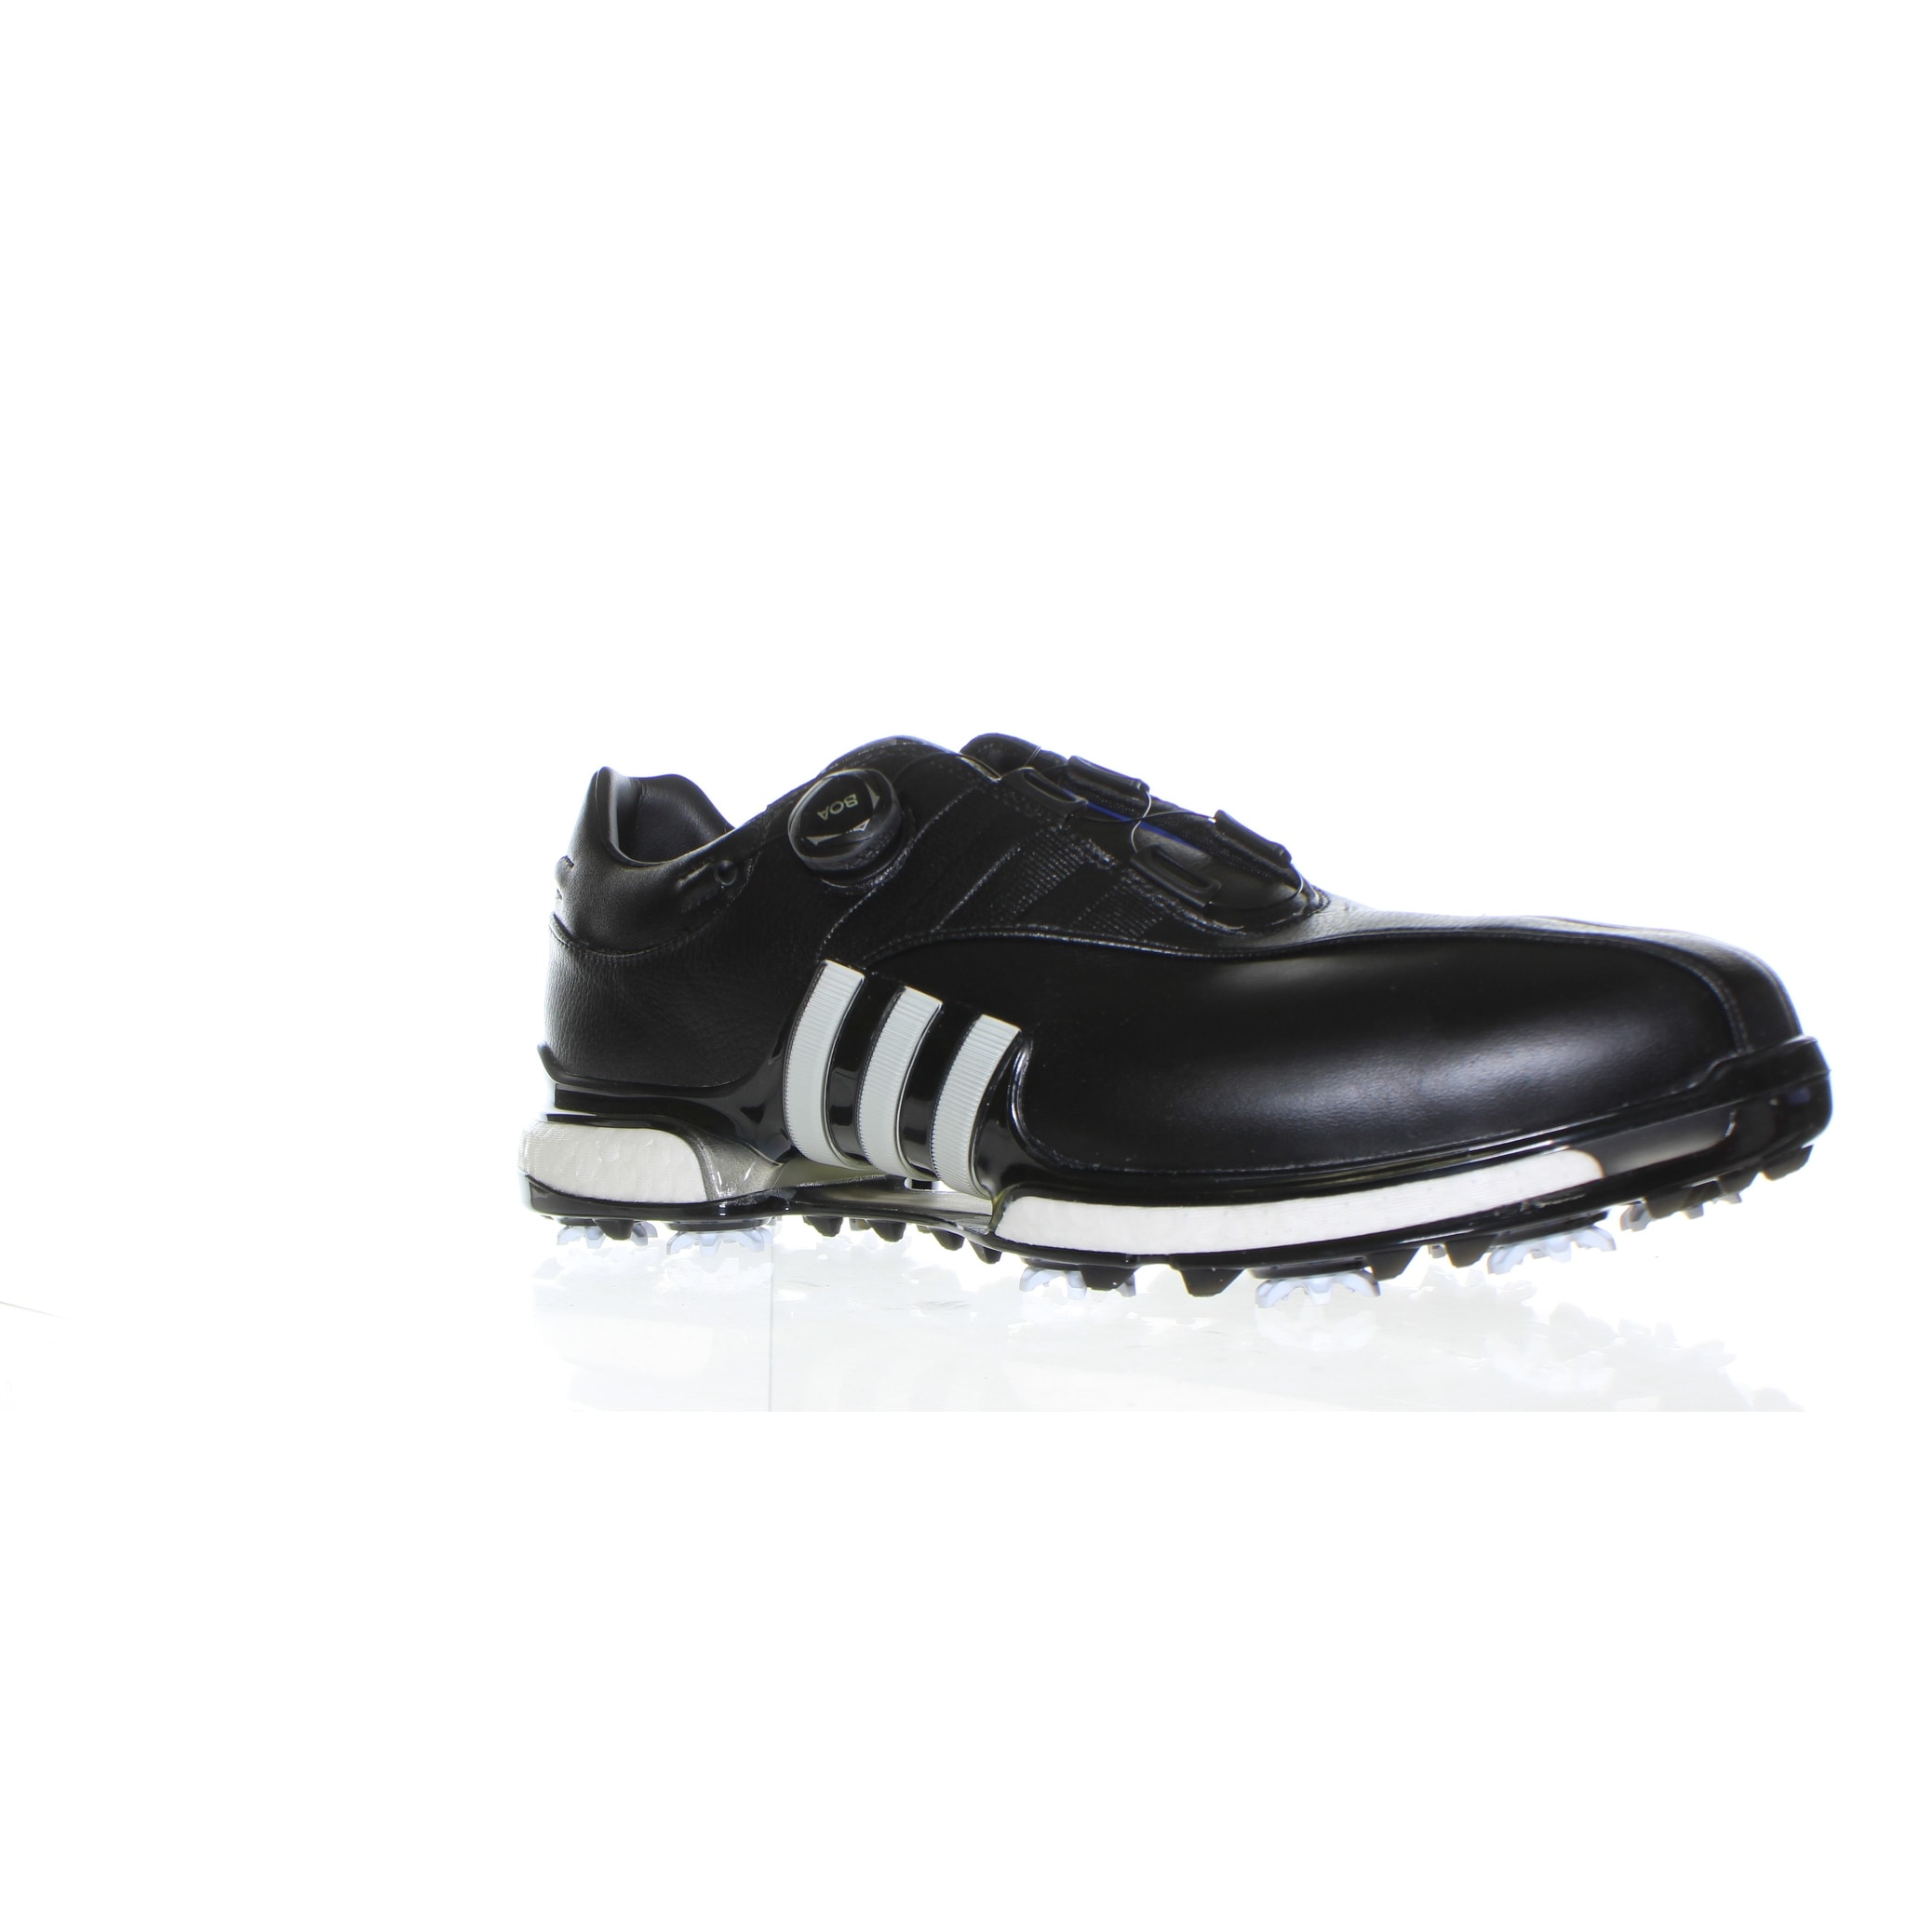 adidas golf shoes size 15